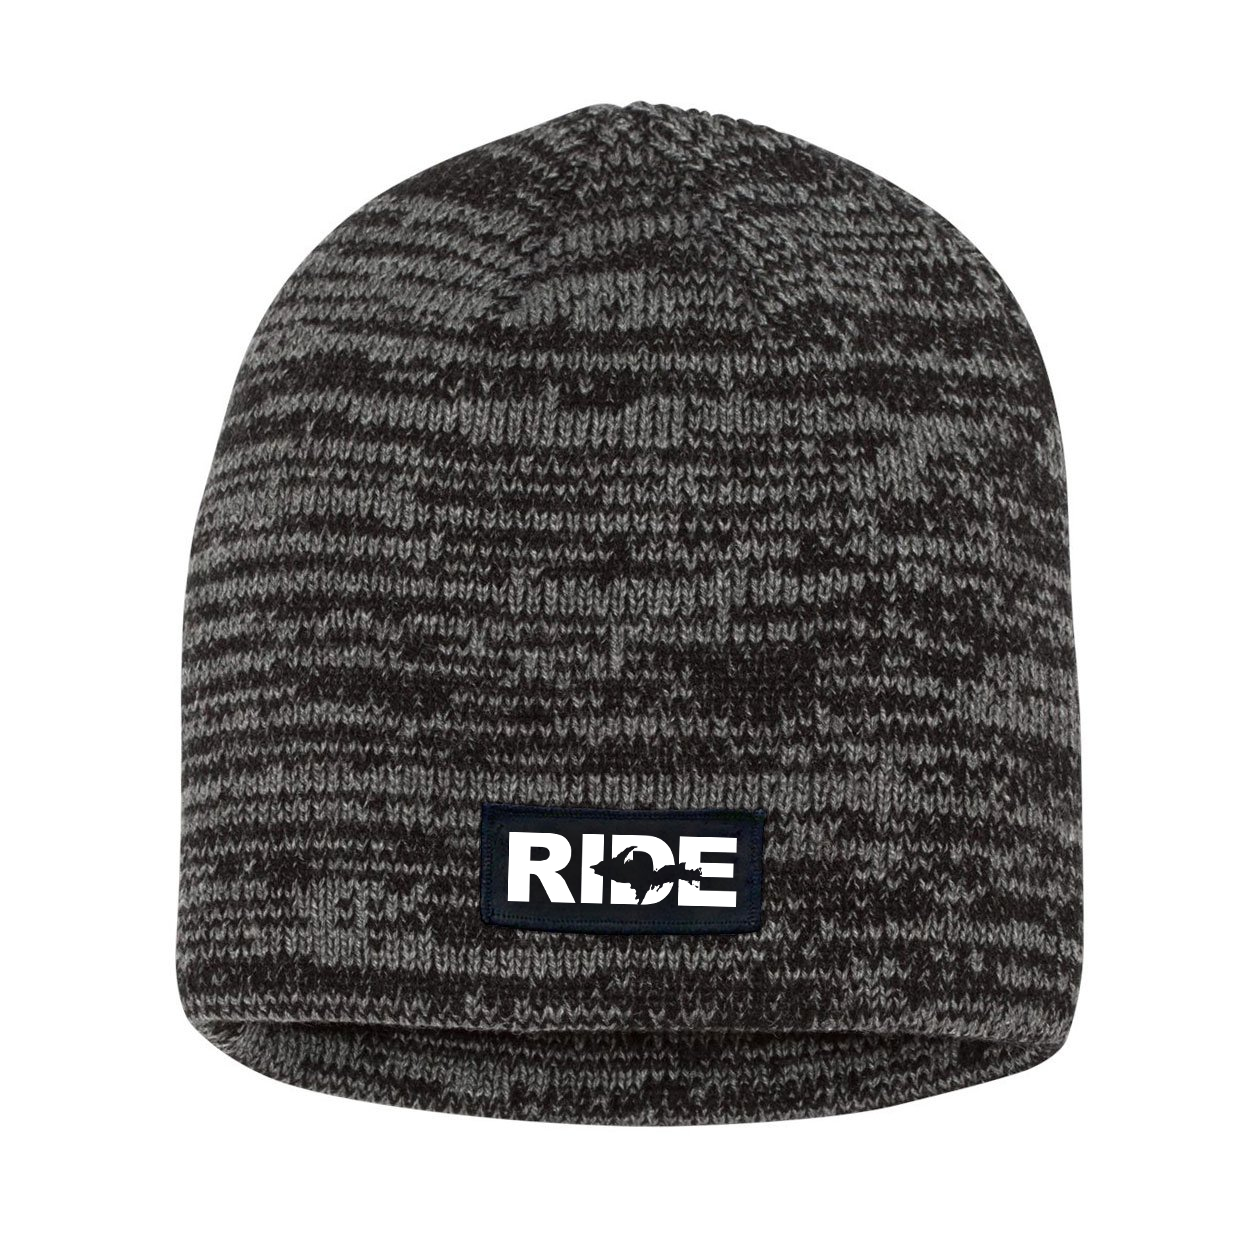 Ride Michigan UP Night Out Woven Patch Skully Marled Knit Beanie Black/Gray (White Logo)